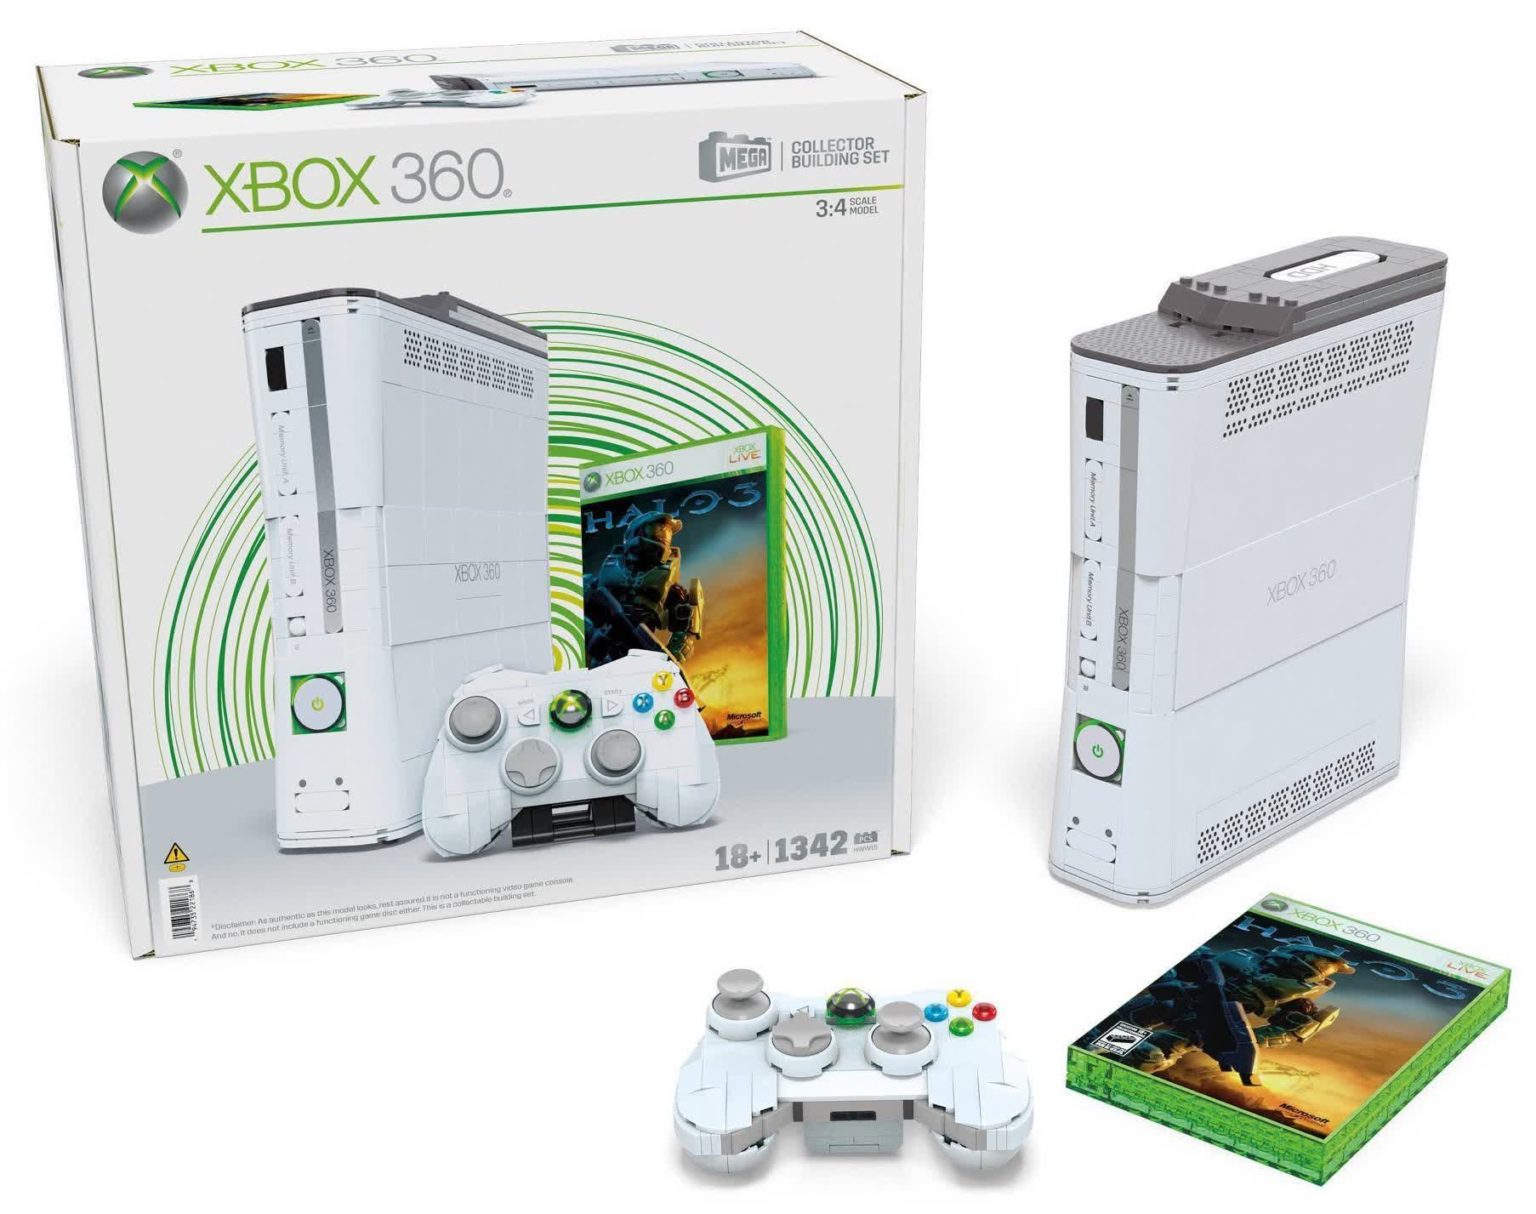 The Mega Bloks Xbox 360 building kit has great attention to detail, including a removable hard drive